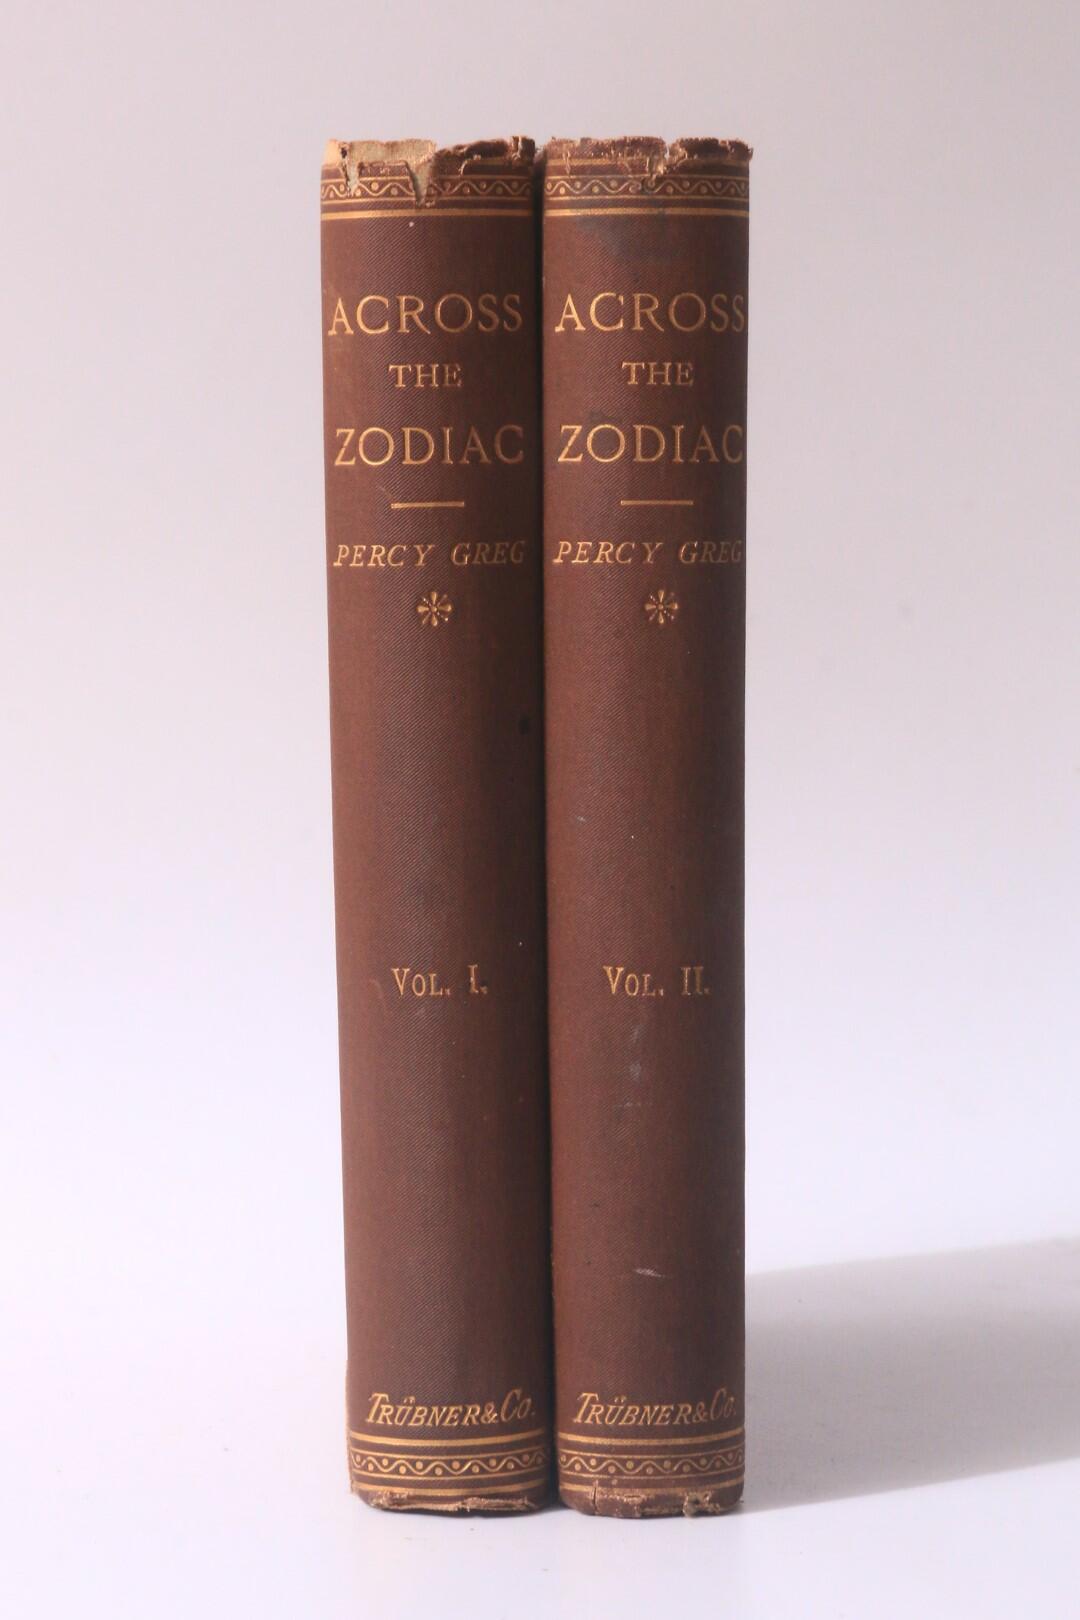 Percy Greg - Across the Zodiac: The Story of a Wrecked Record - Trubner & Co., 1880, First Edition.